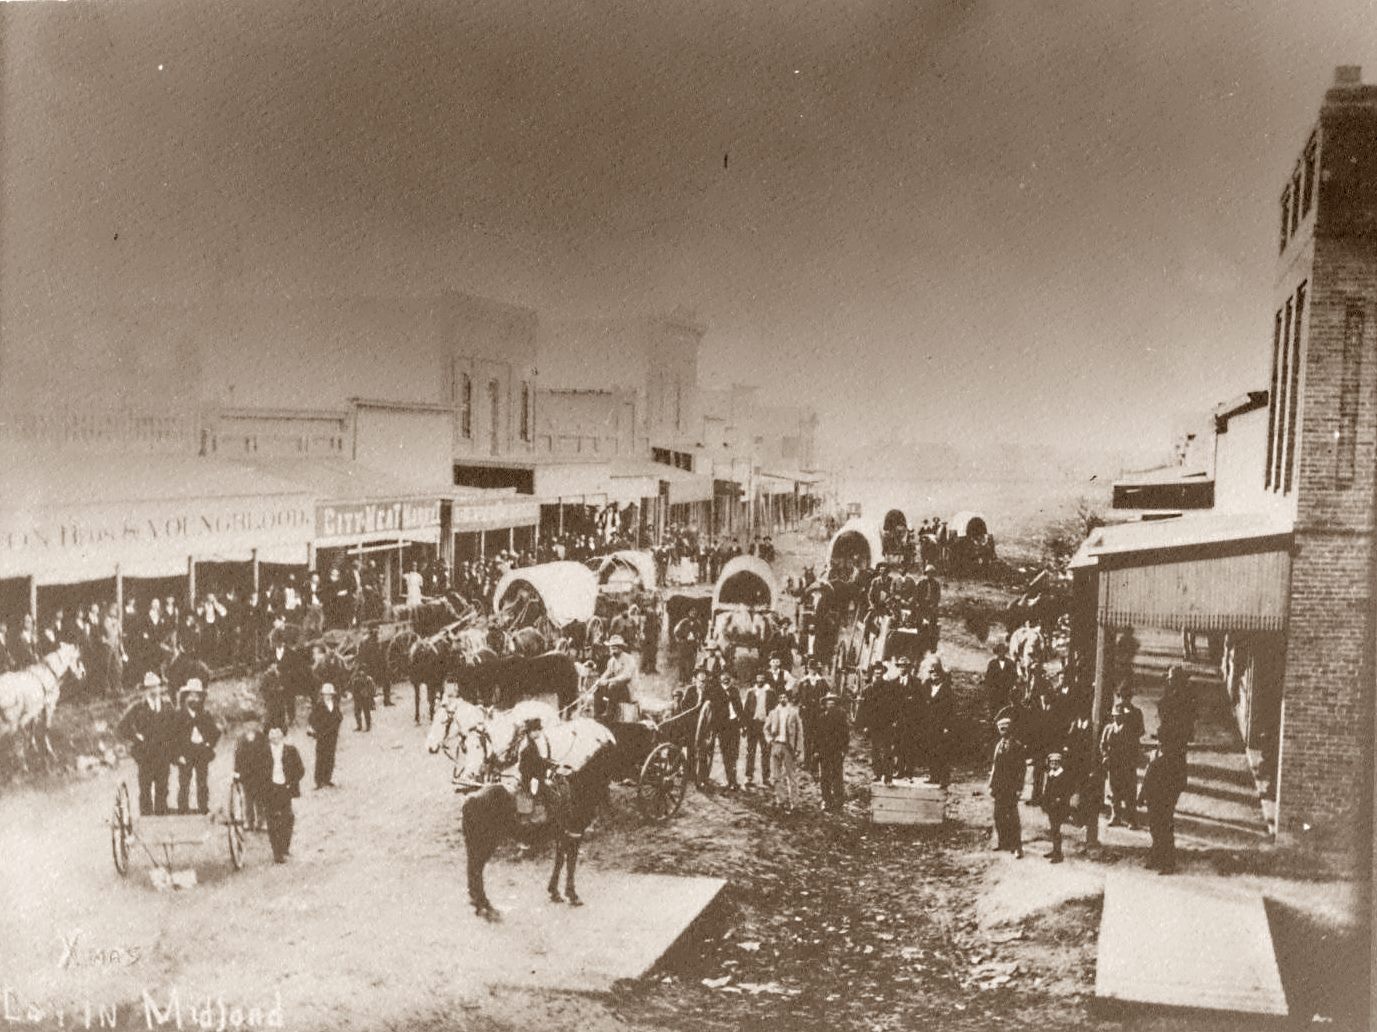 Midland Texas on Christmas Day in 1894